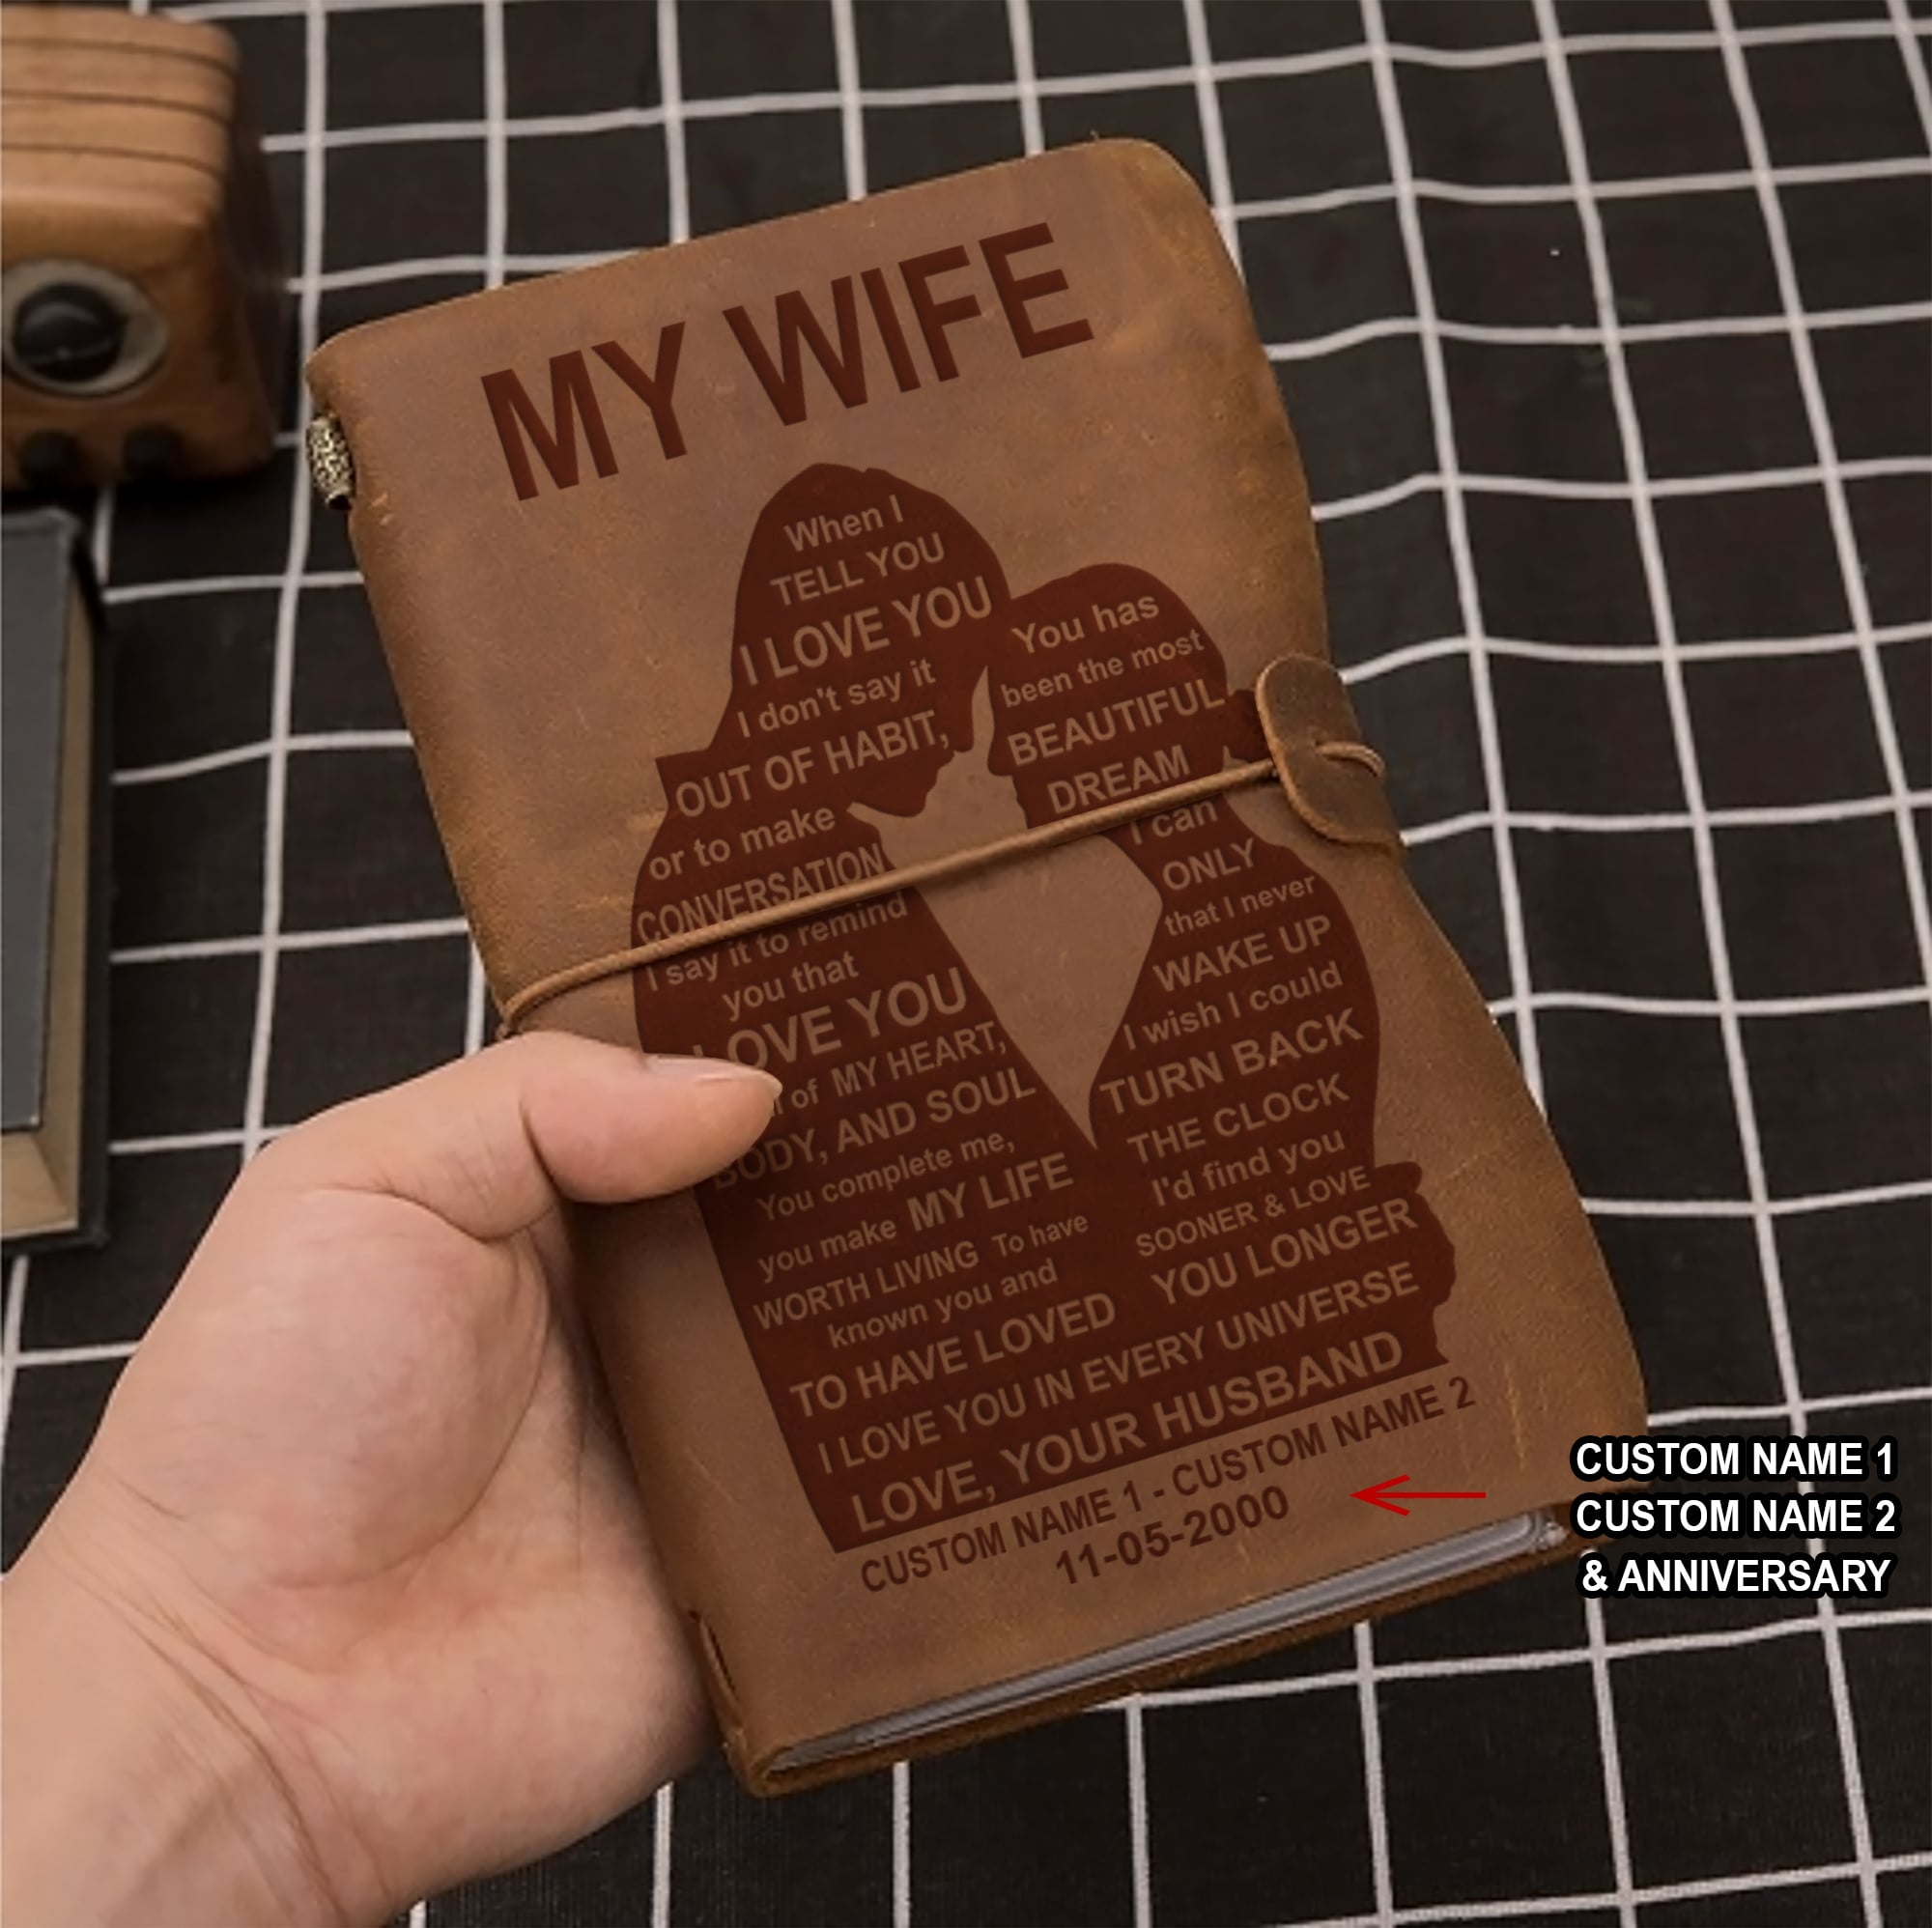 Perfect for anniversaries, birthdays, or just because-Vintage Journal Husband to wife-When I tell you I love you